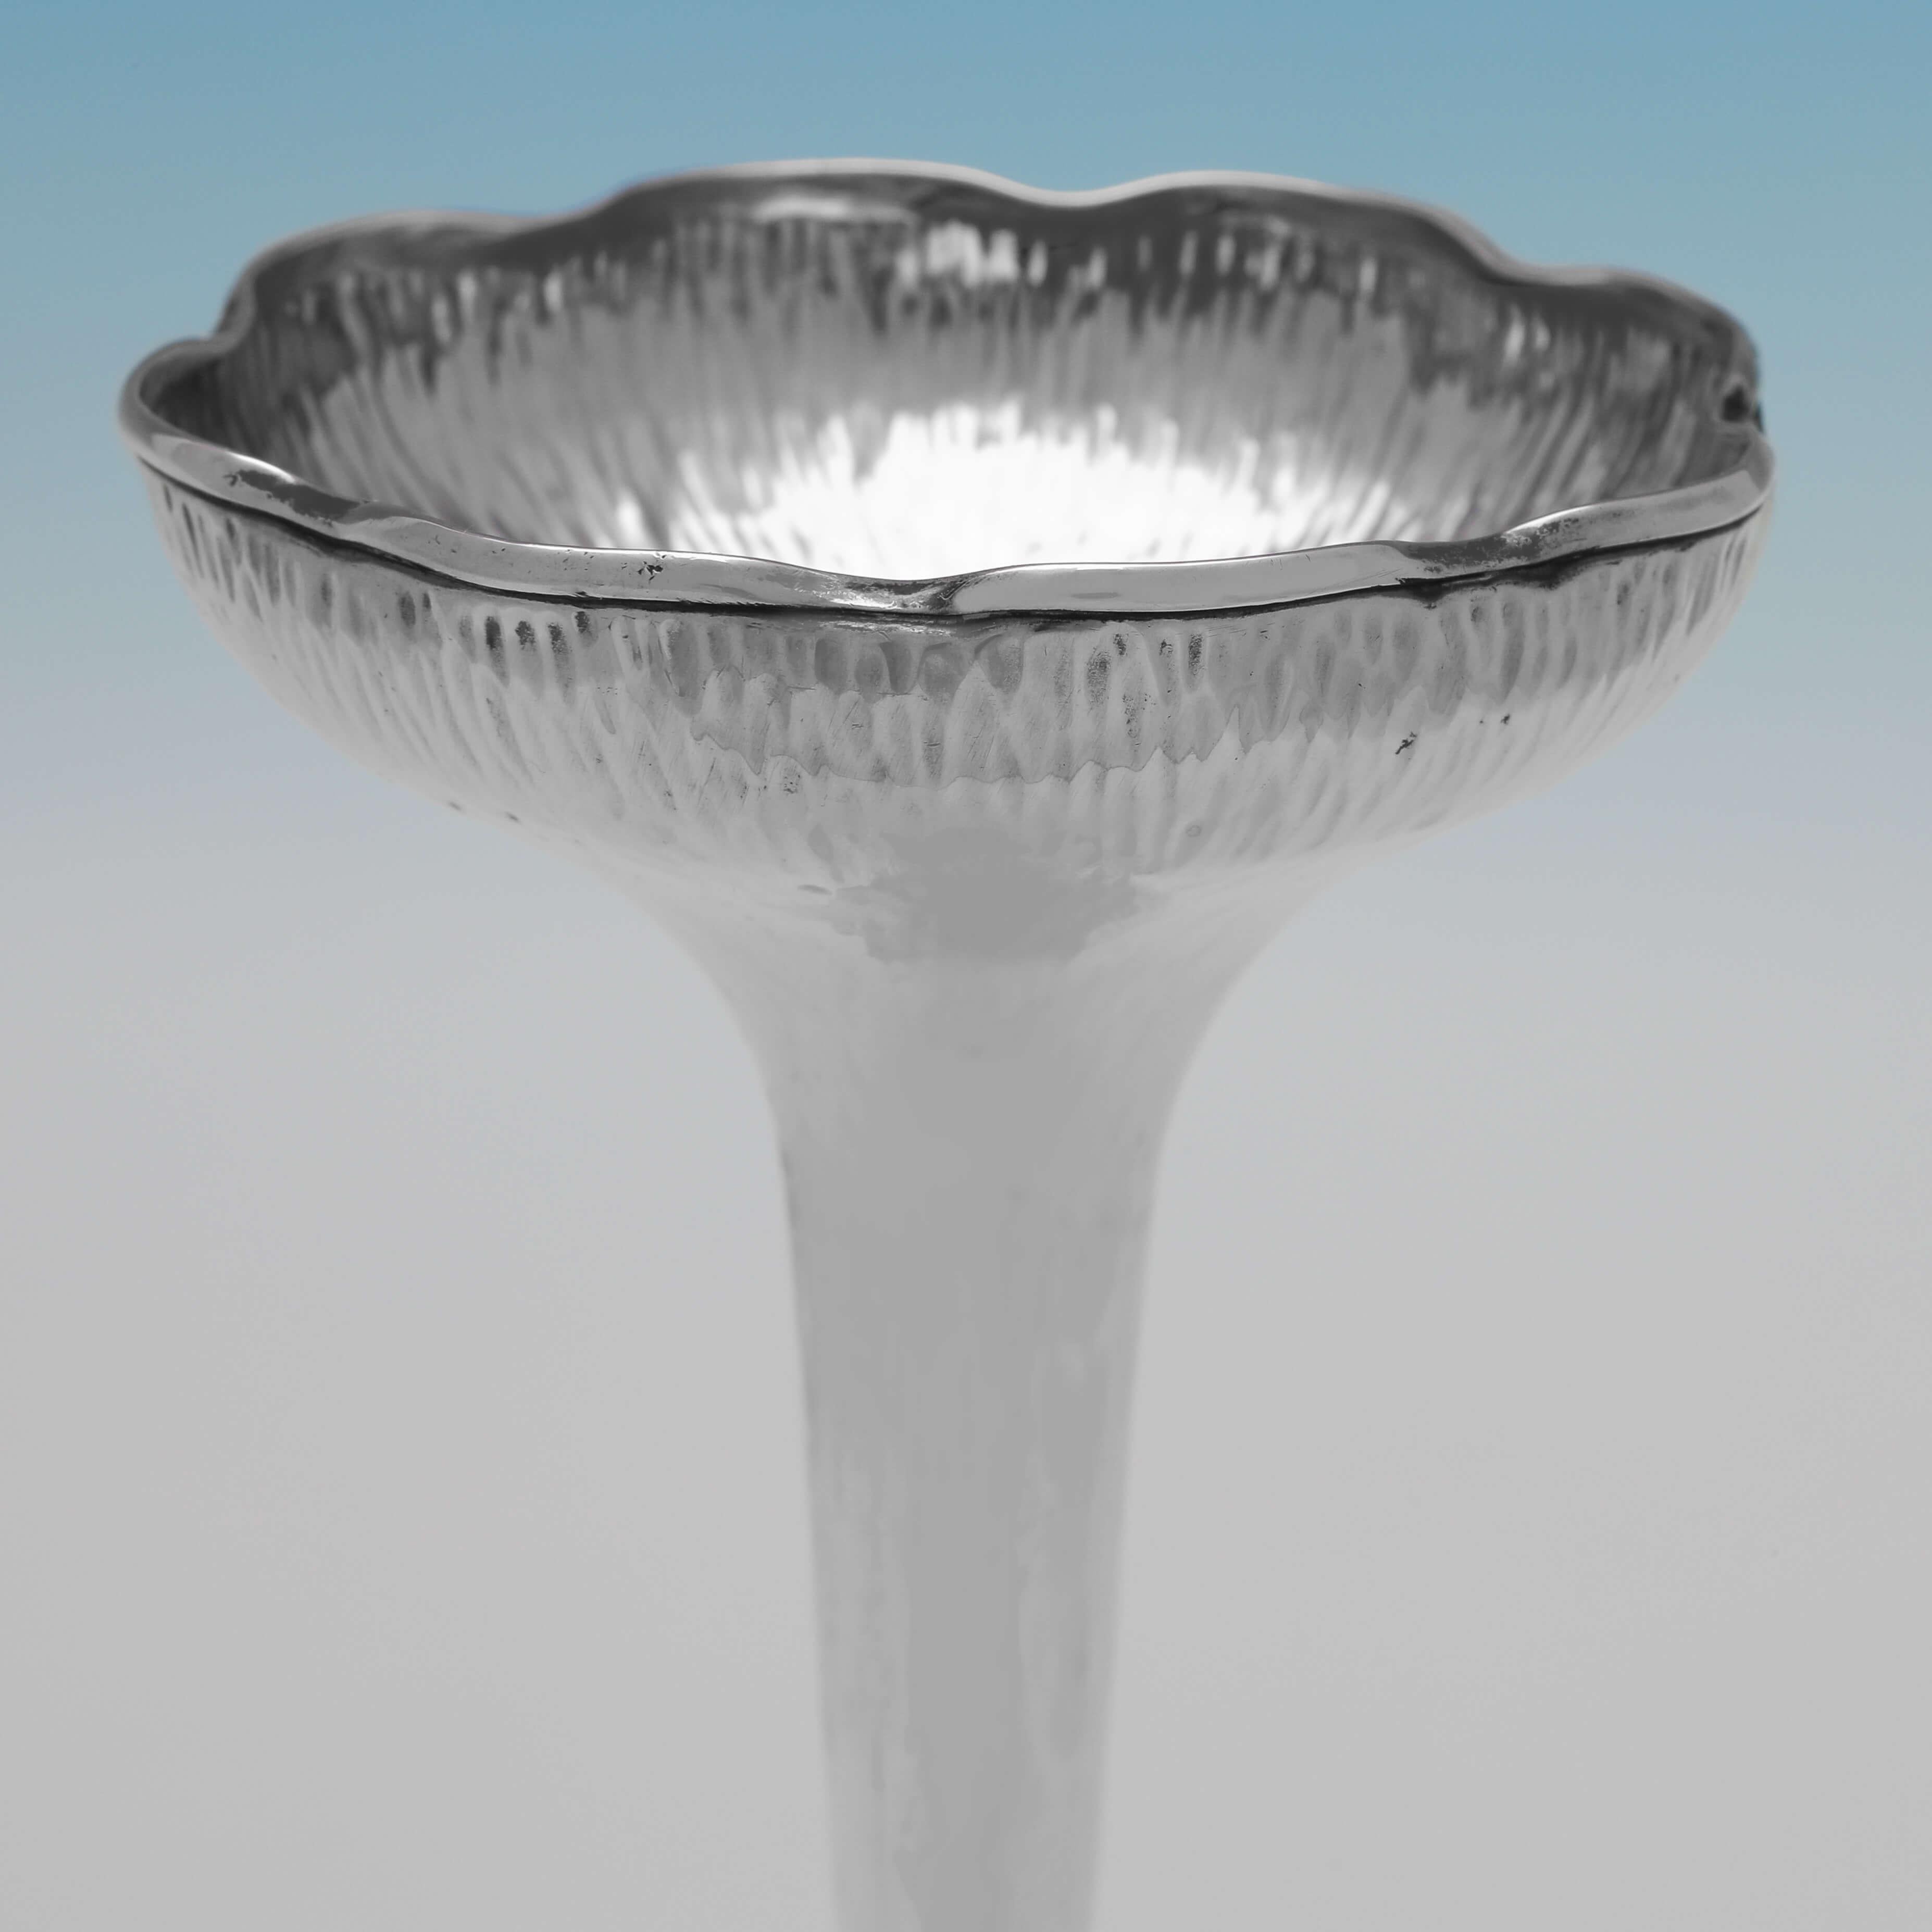 Hallmarked in Birmingham in 1904 by Henry Matthews, this attractive Edwardian, Antique Sterling Silver Vase, features a planished finish. It measures 6.75